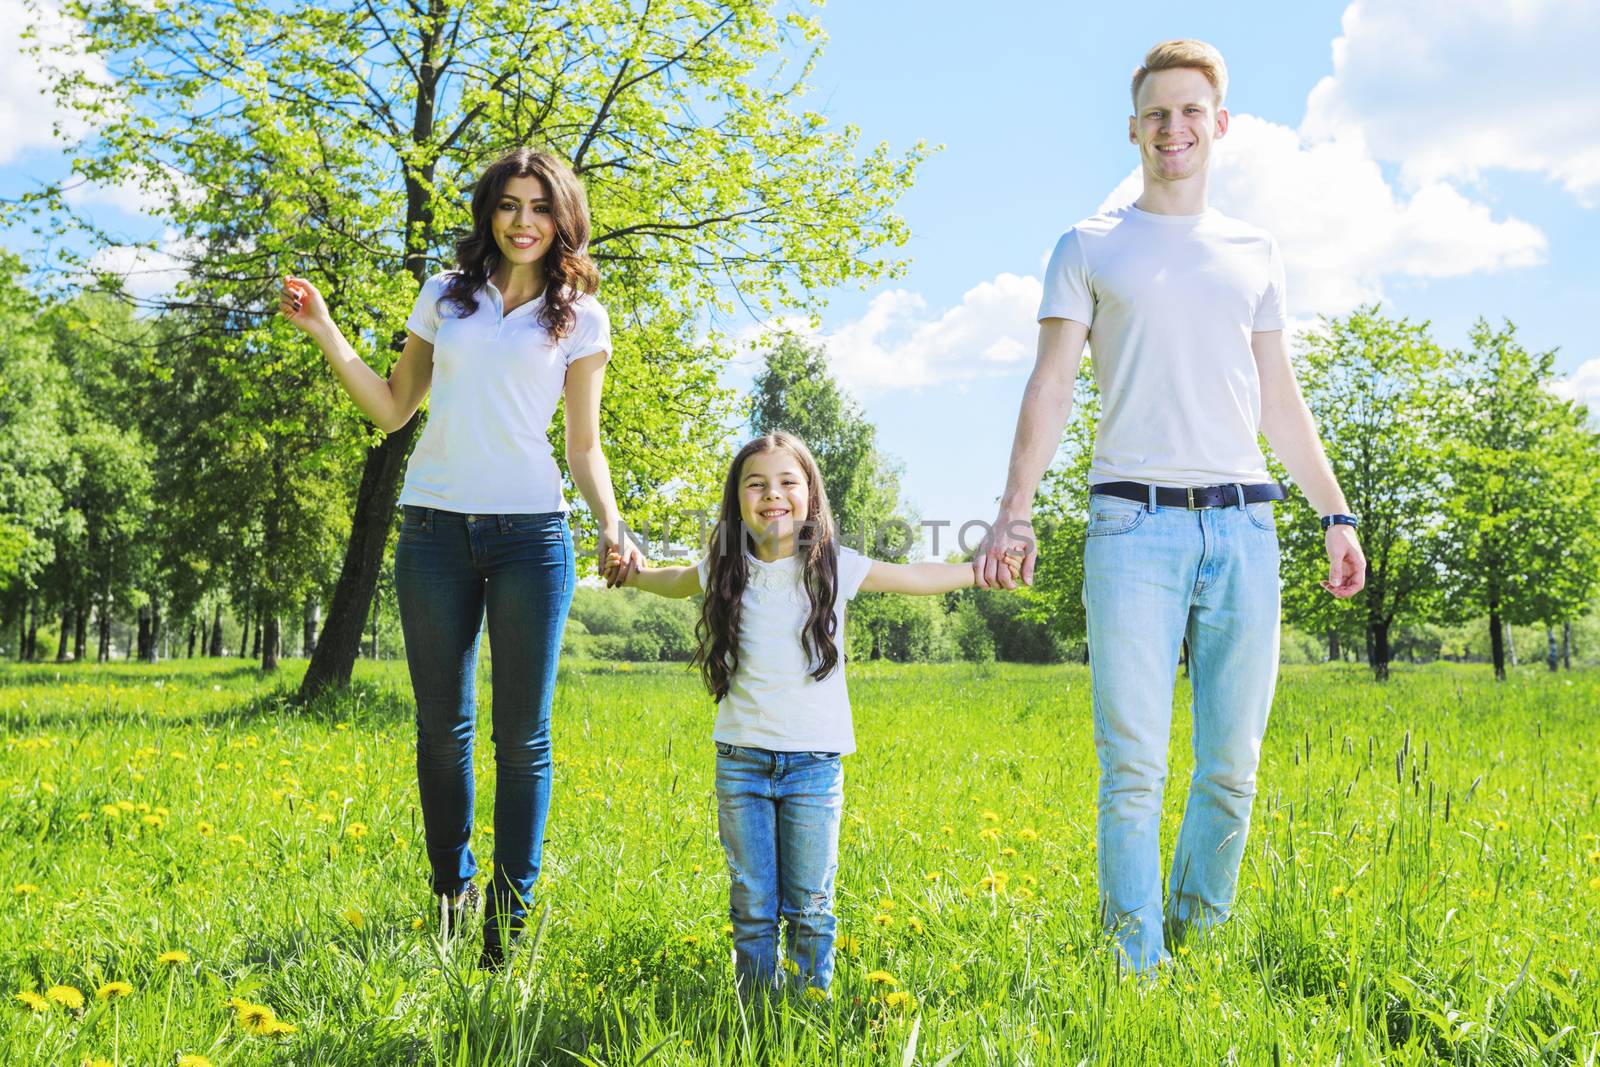 Cheerful family in summer sunny park walking on grass